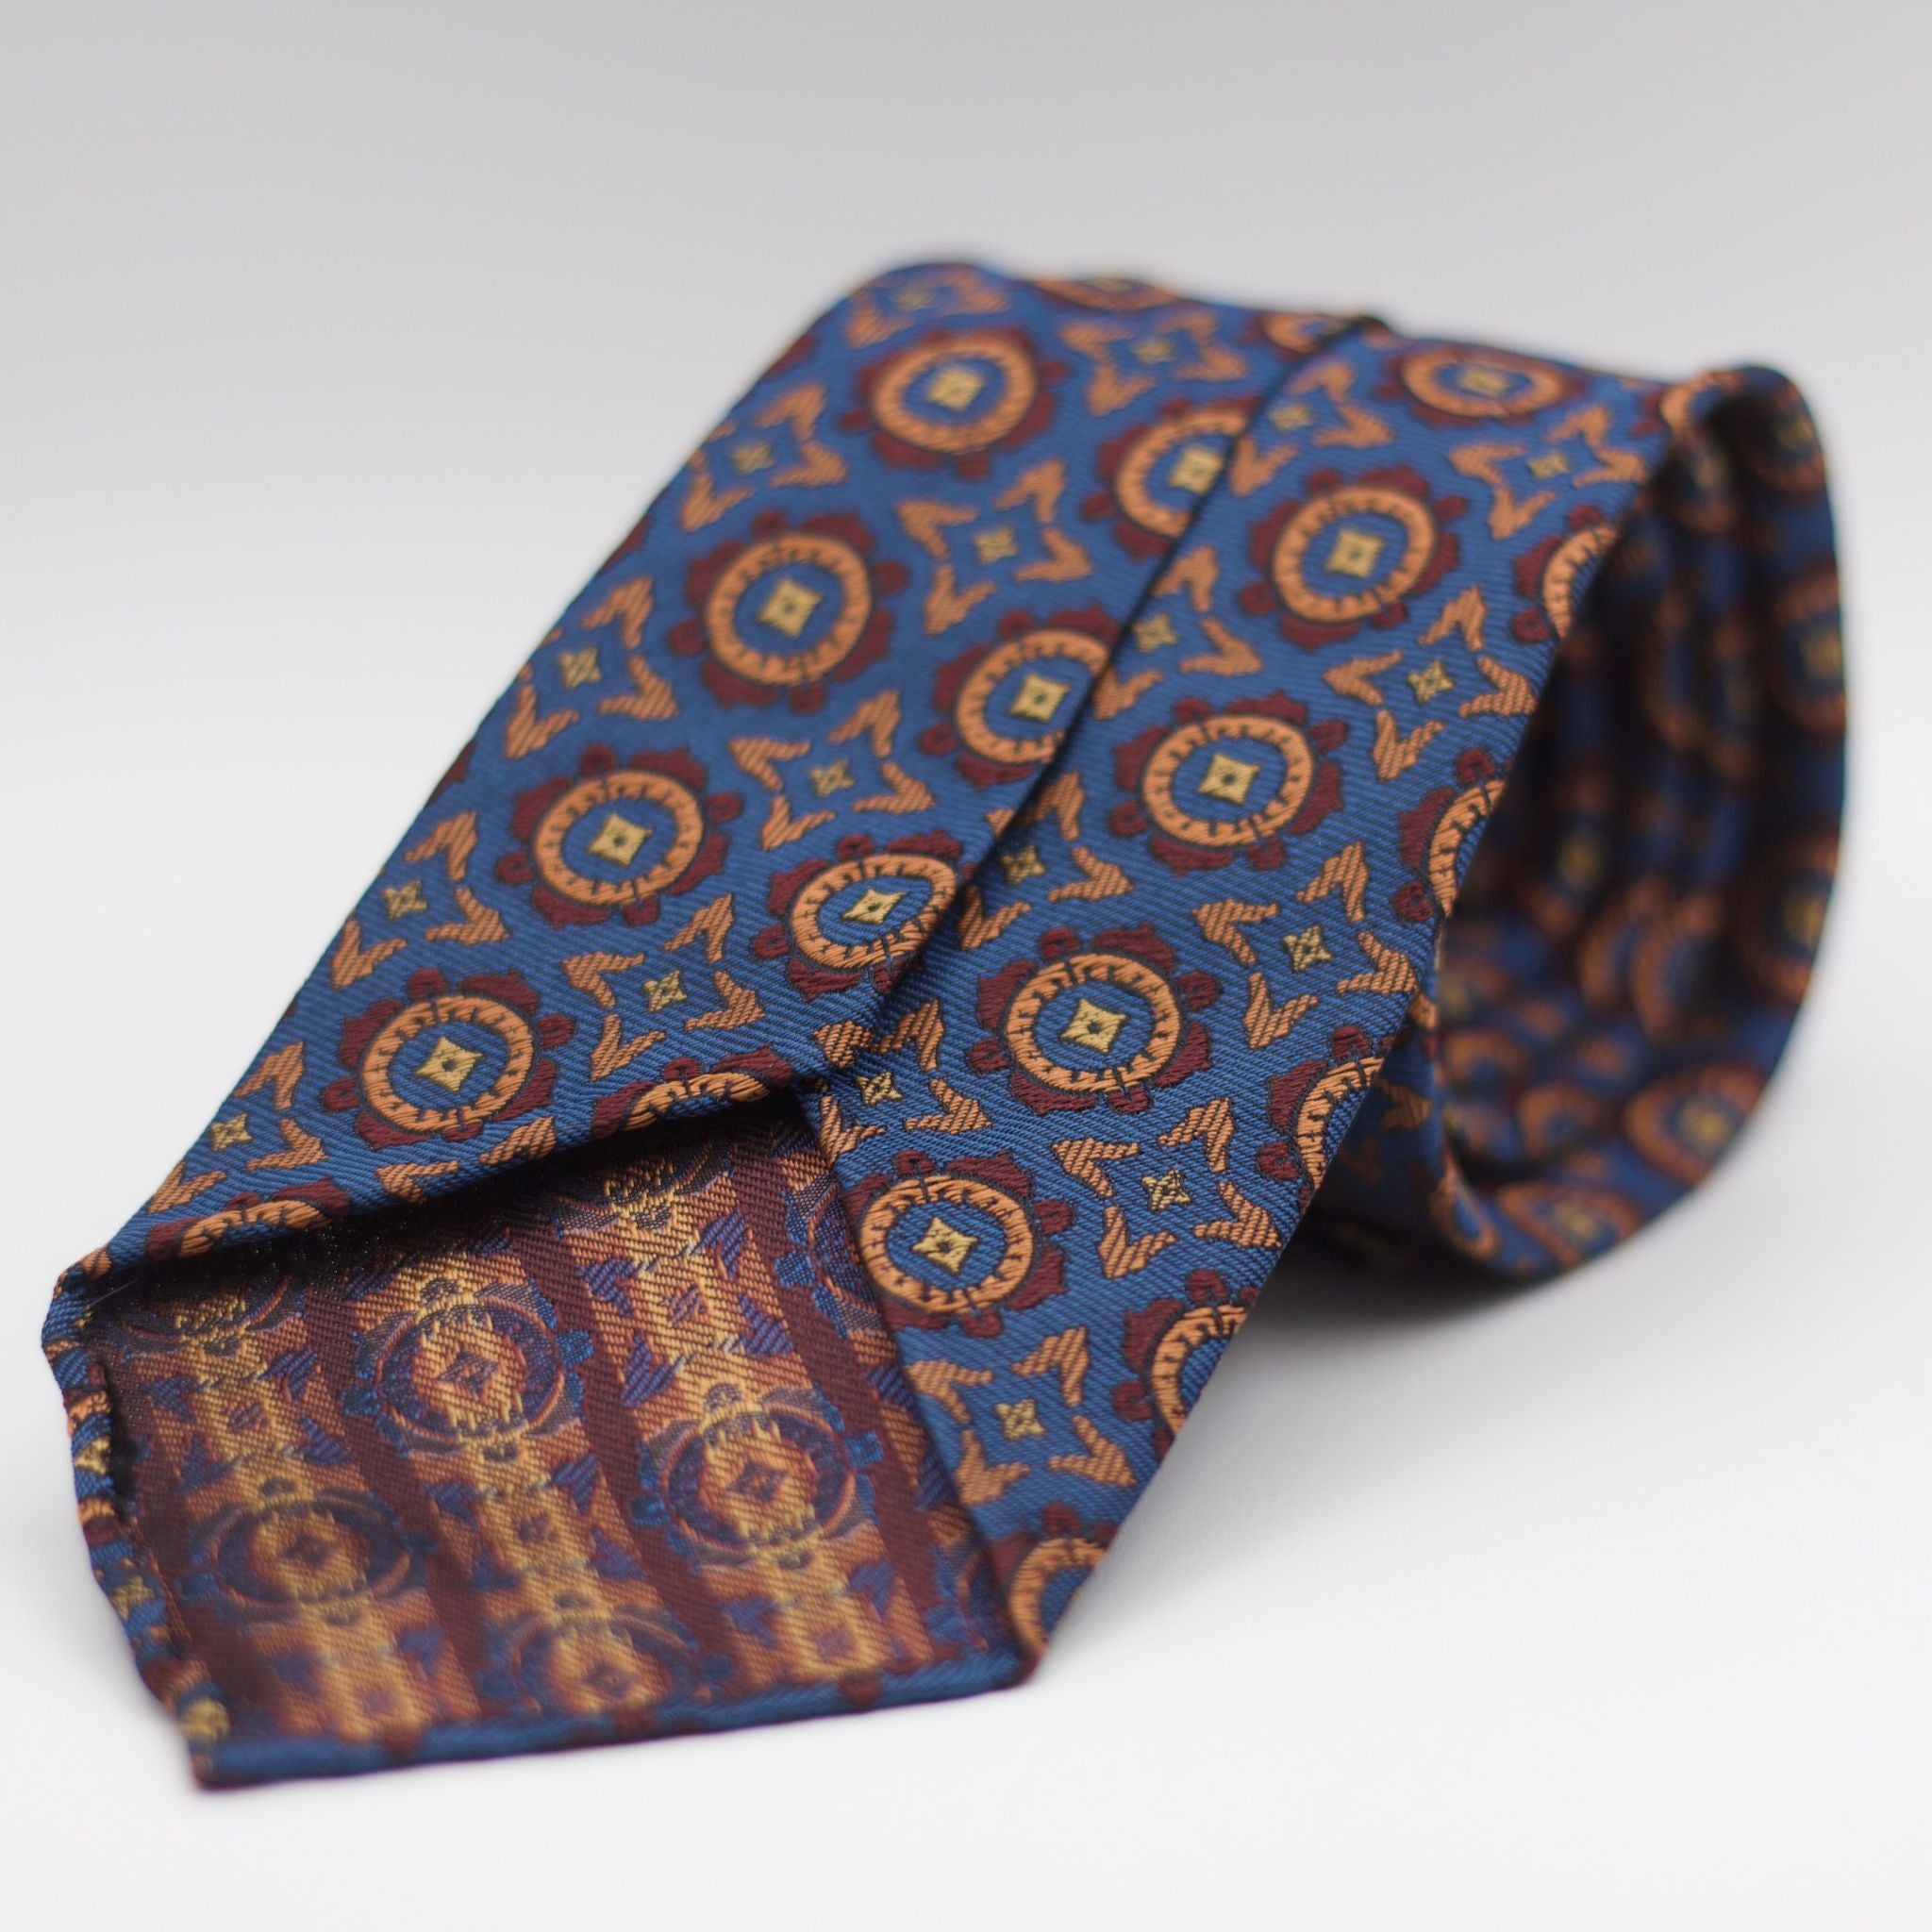 Cruciani & Bella 100% Woven Jacquard Silk Unlined Blue, Burgundy and Gold Motif Unlined Tie Handmade in England 8 x 153 cm